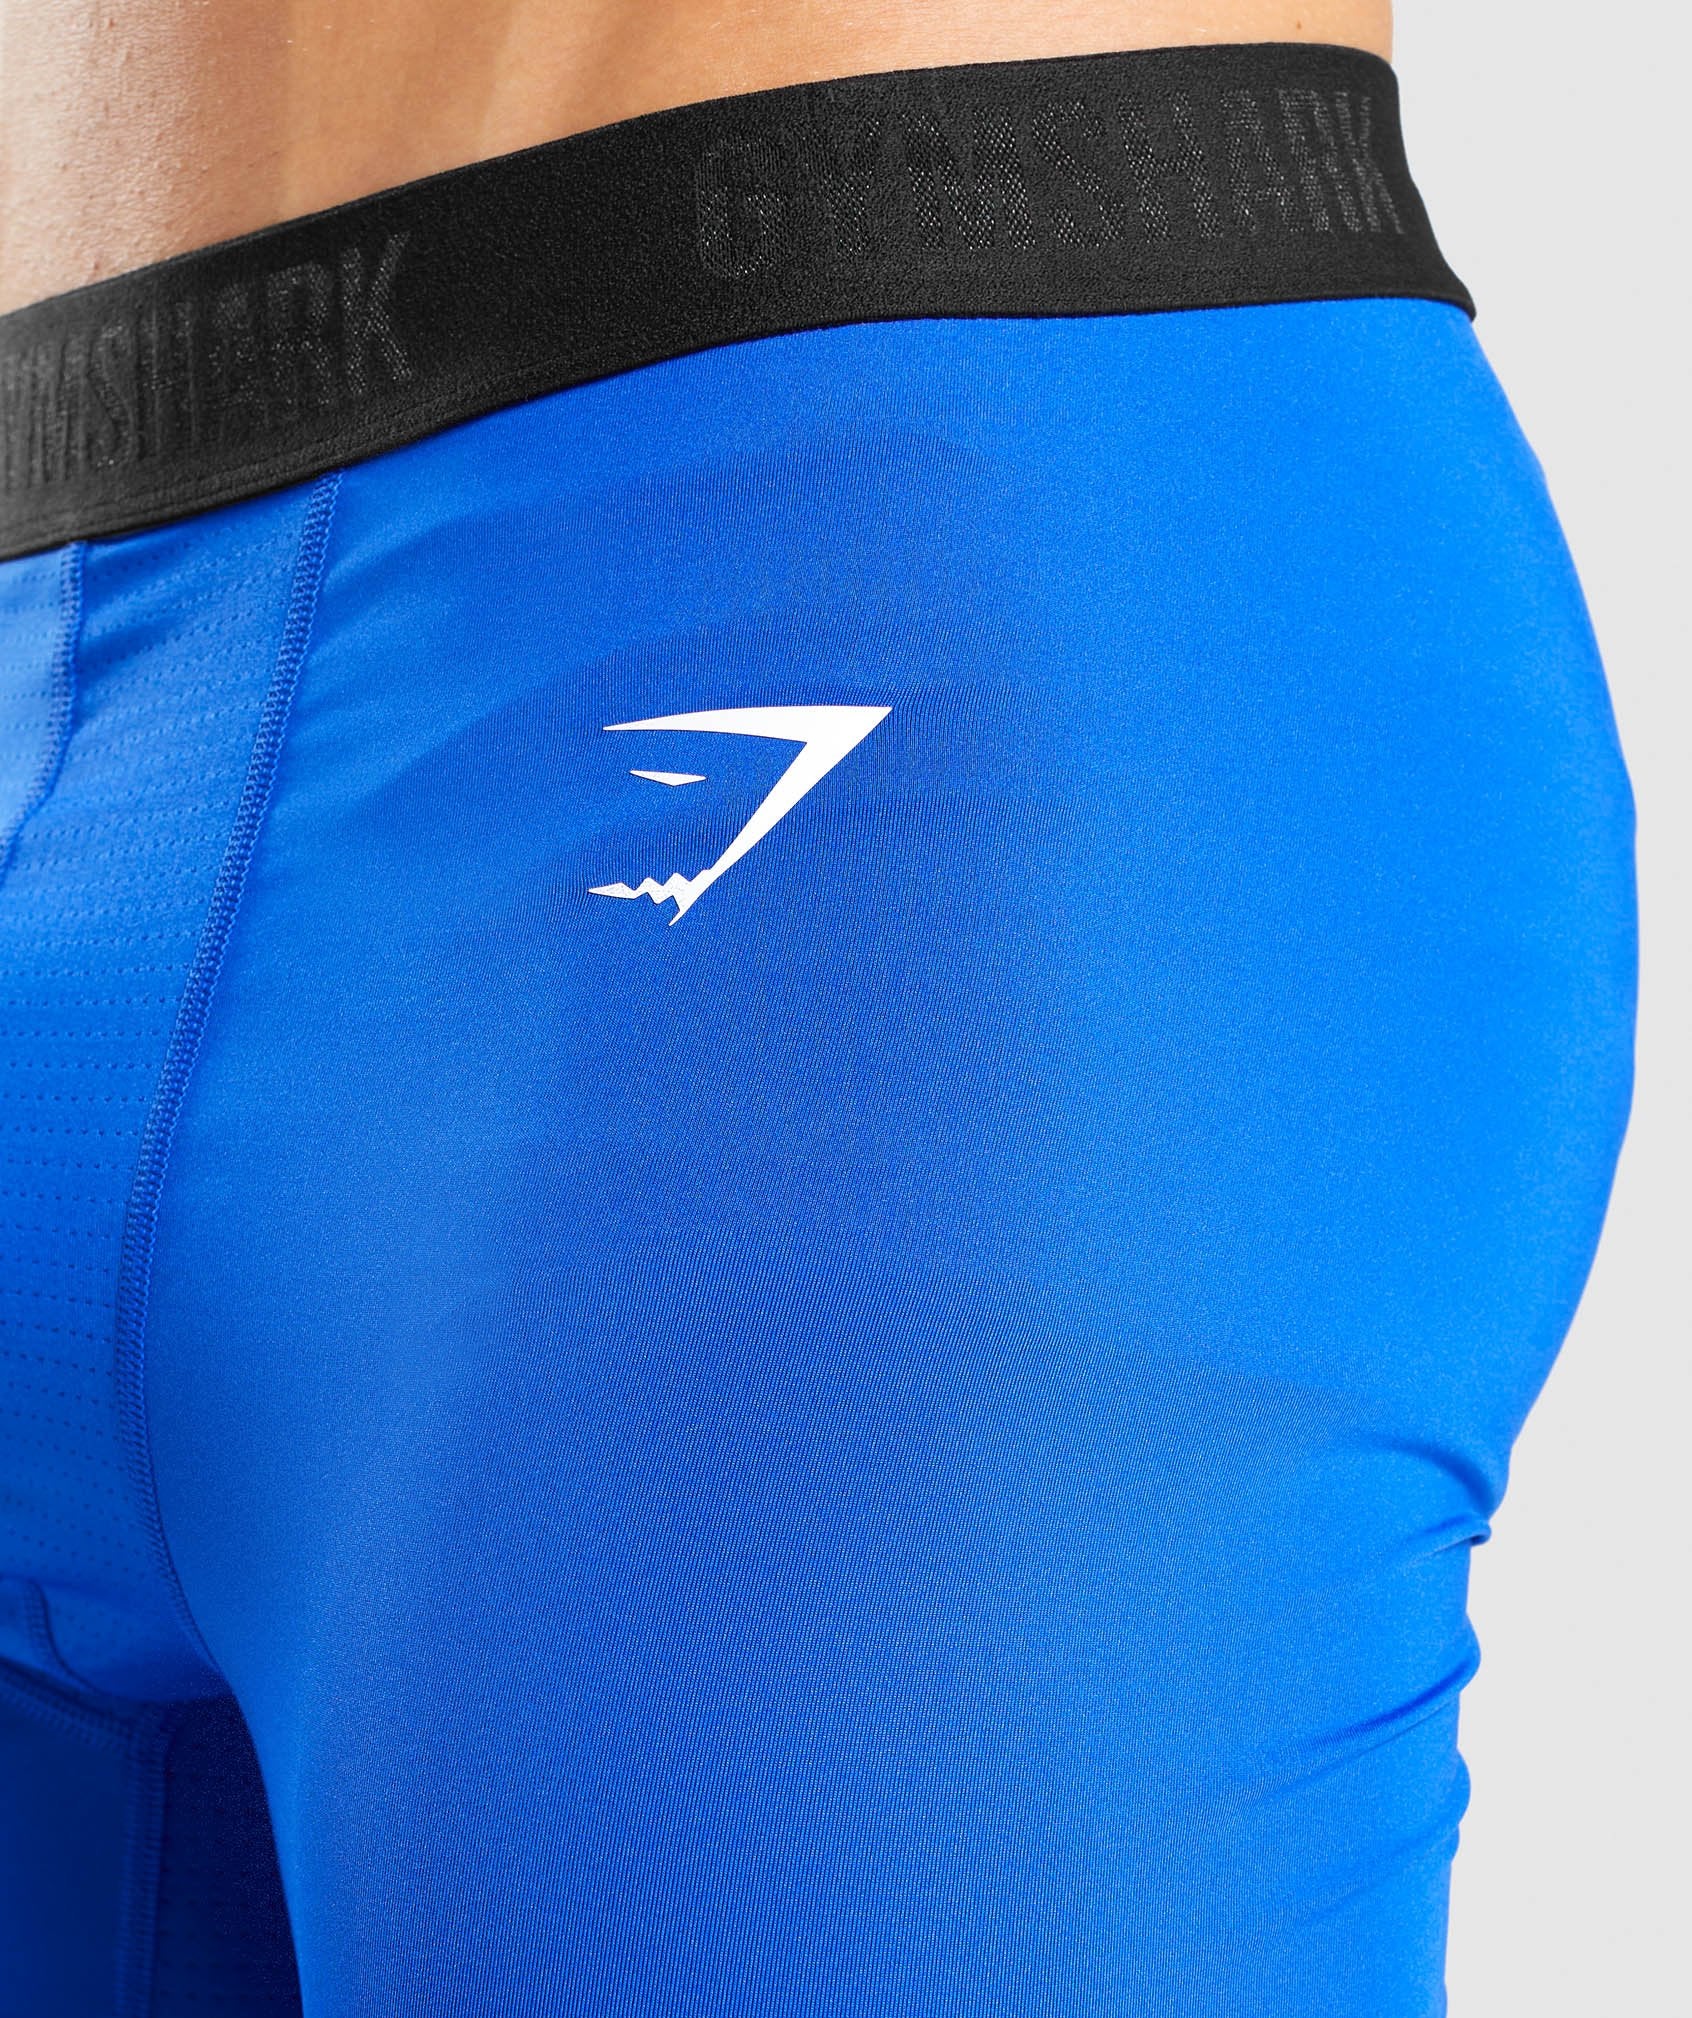 Element Baselayer Shorts in Blue - view 7